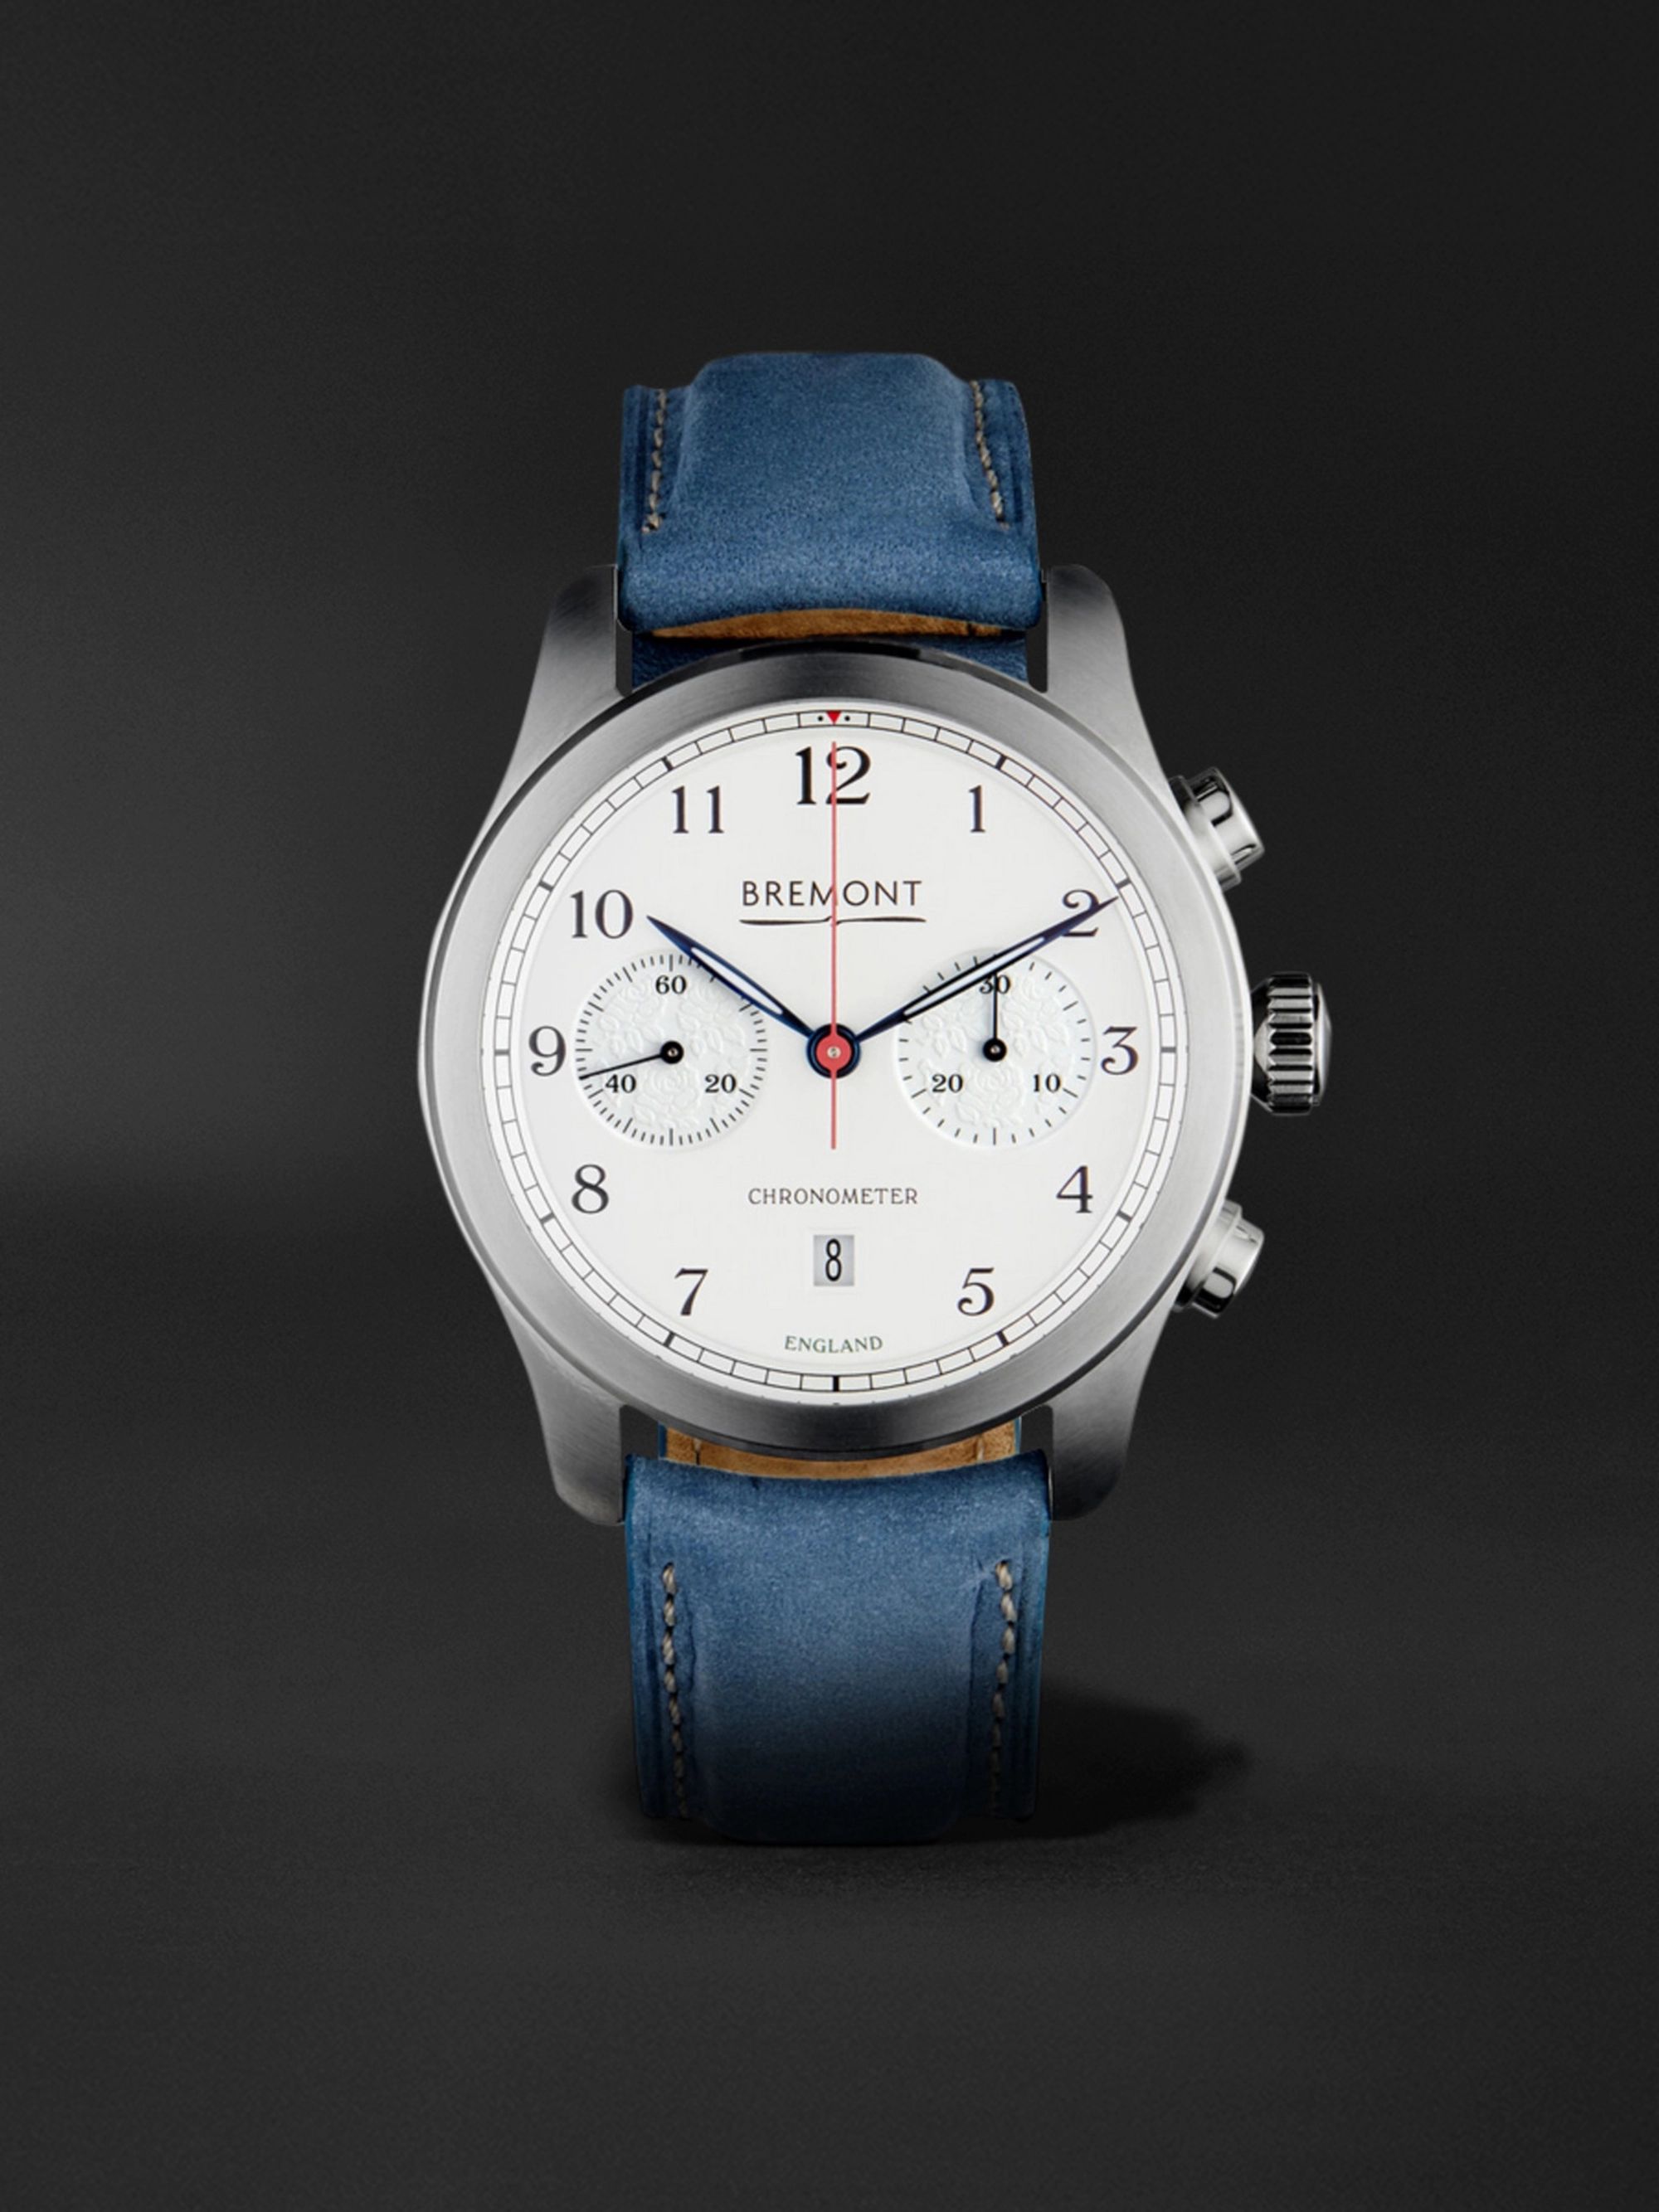 BREMONT ALT1-C Rose Automatic Chronograph 43mm Stainless Steel and Nubuck Watch, Ref. No. ALT1-C/ROSE